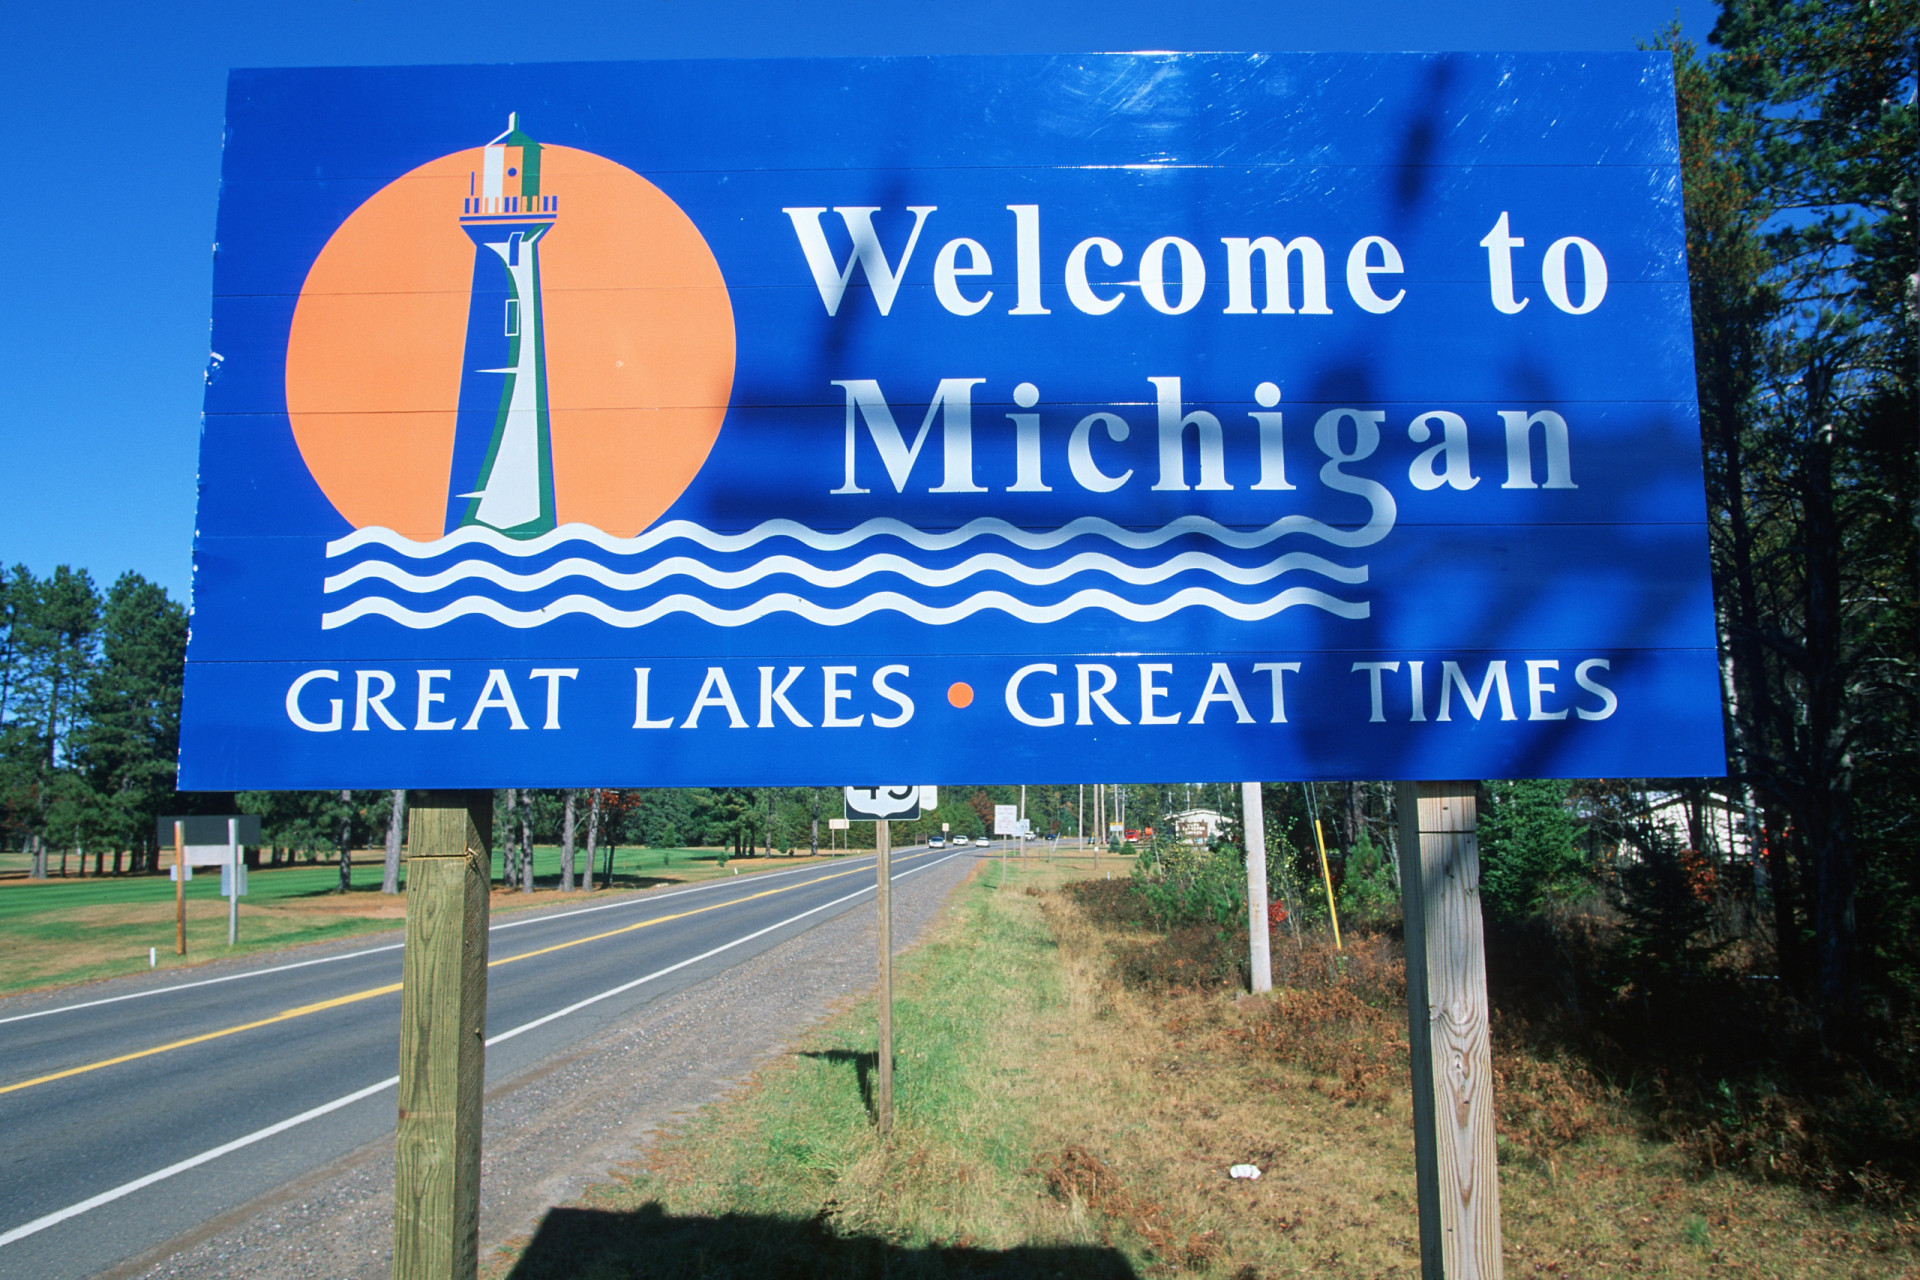 <p>Michigan's amazing shoreline attracts visitors and locals alike, keen to experience the Great Lakes. </p><p>You may also like:<a href="https://www.starsinsider.com/n/438306?utm_source=msn.com&utm_medium=display&utm_campaign=referral_description&utm_content=572689en-en"> Amber Tamblyn, David Cross share how couples therapy helped both on- and off-screen</a></p>